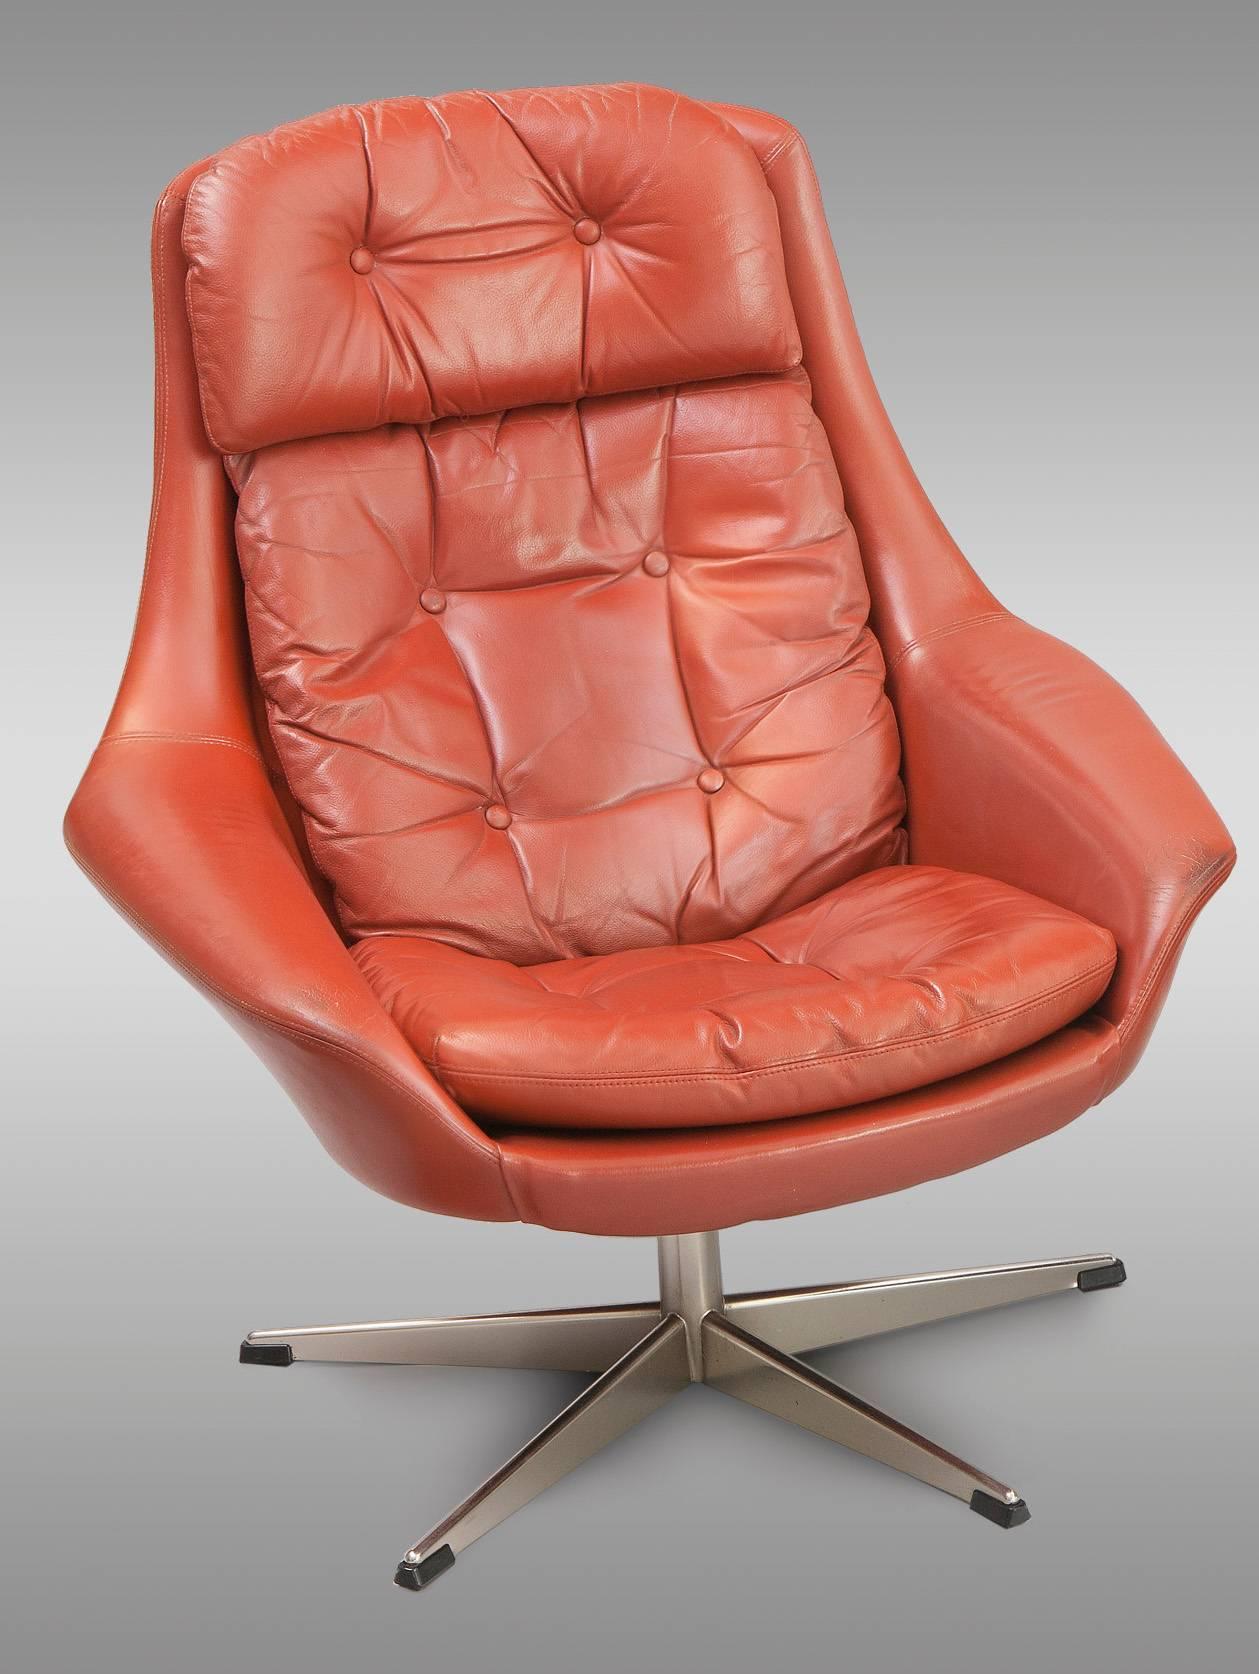 This pair of swivel armchairs in leather was designed by Henry Walter Klein in 1970.